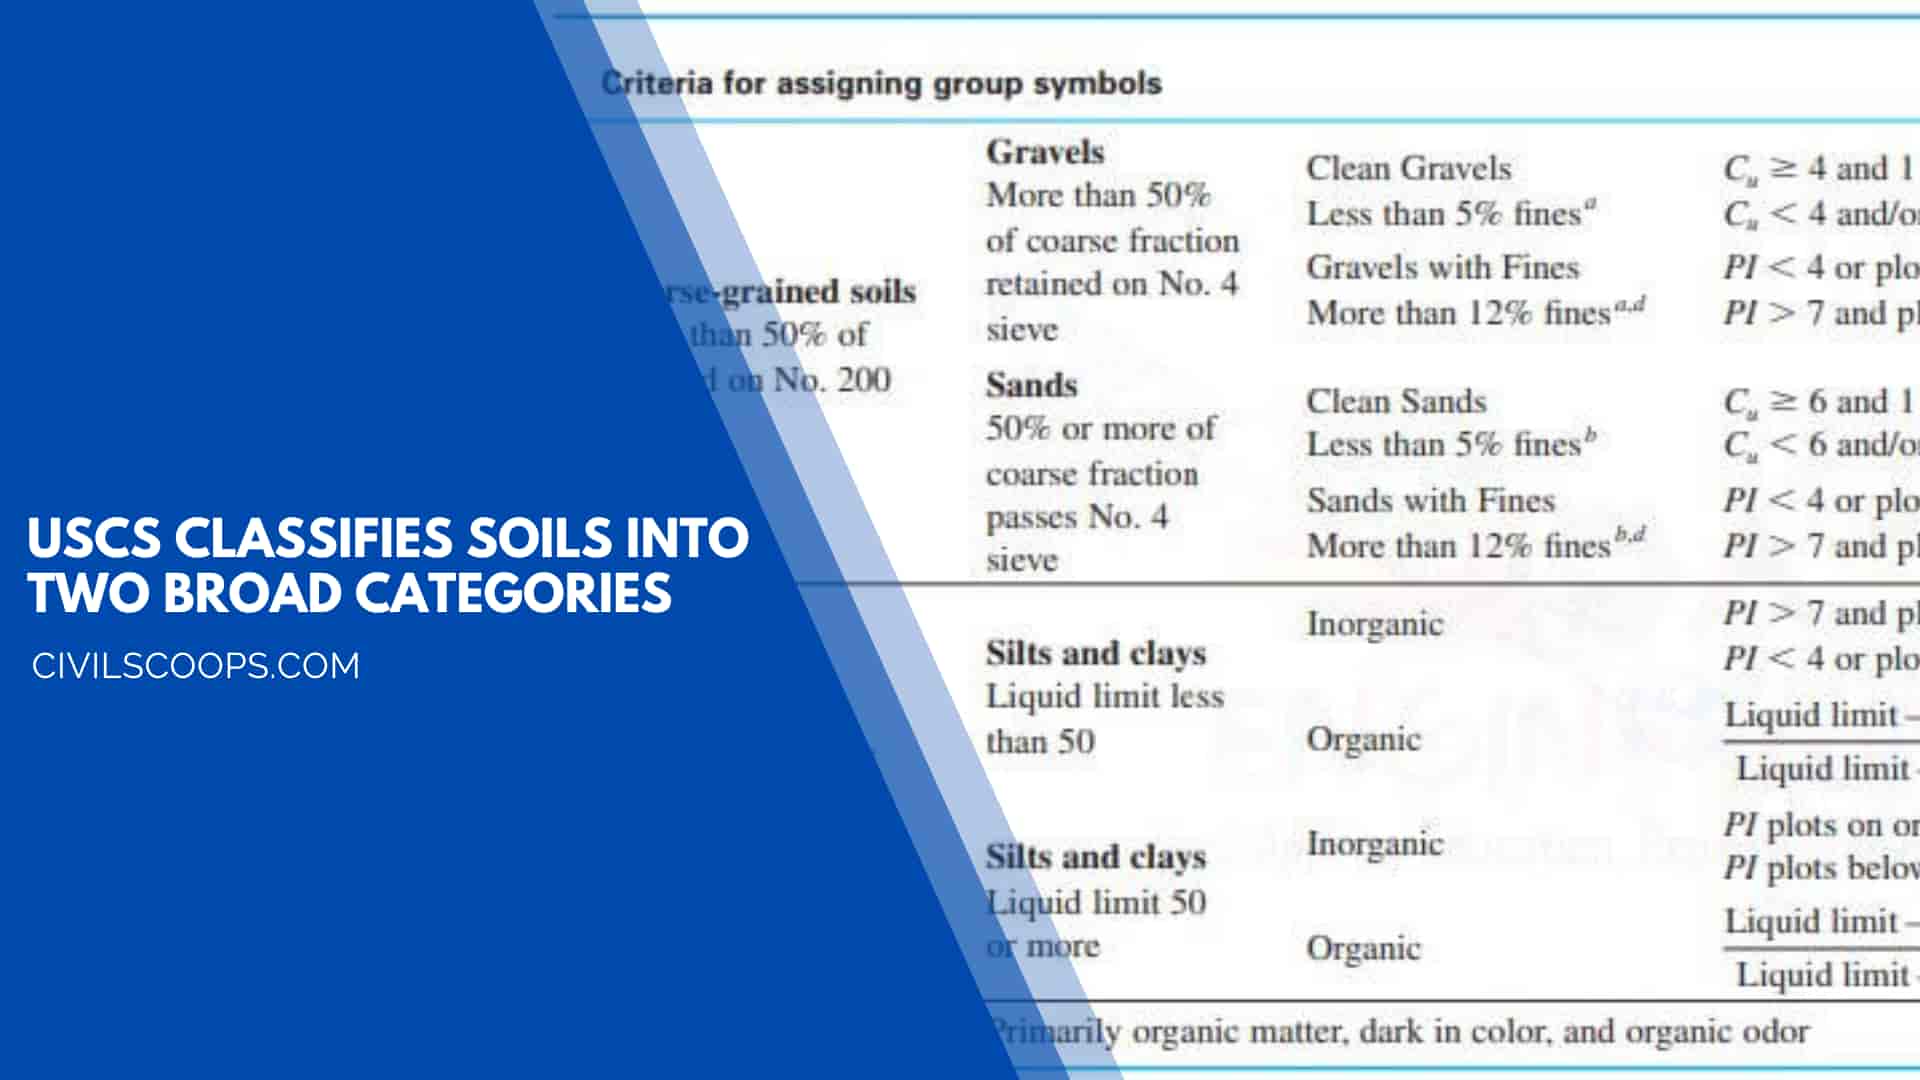 USCS Classifies Soils into Two Broad Categories